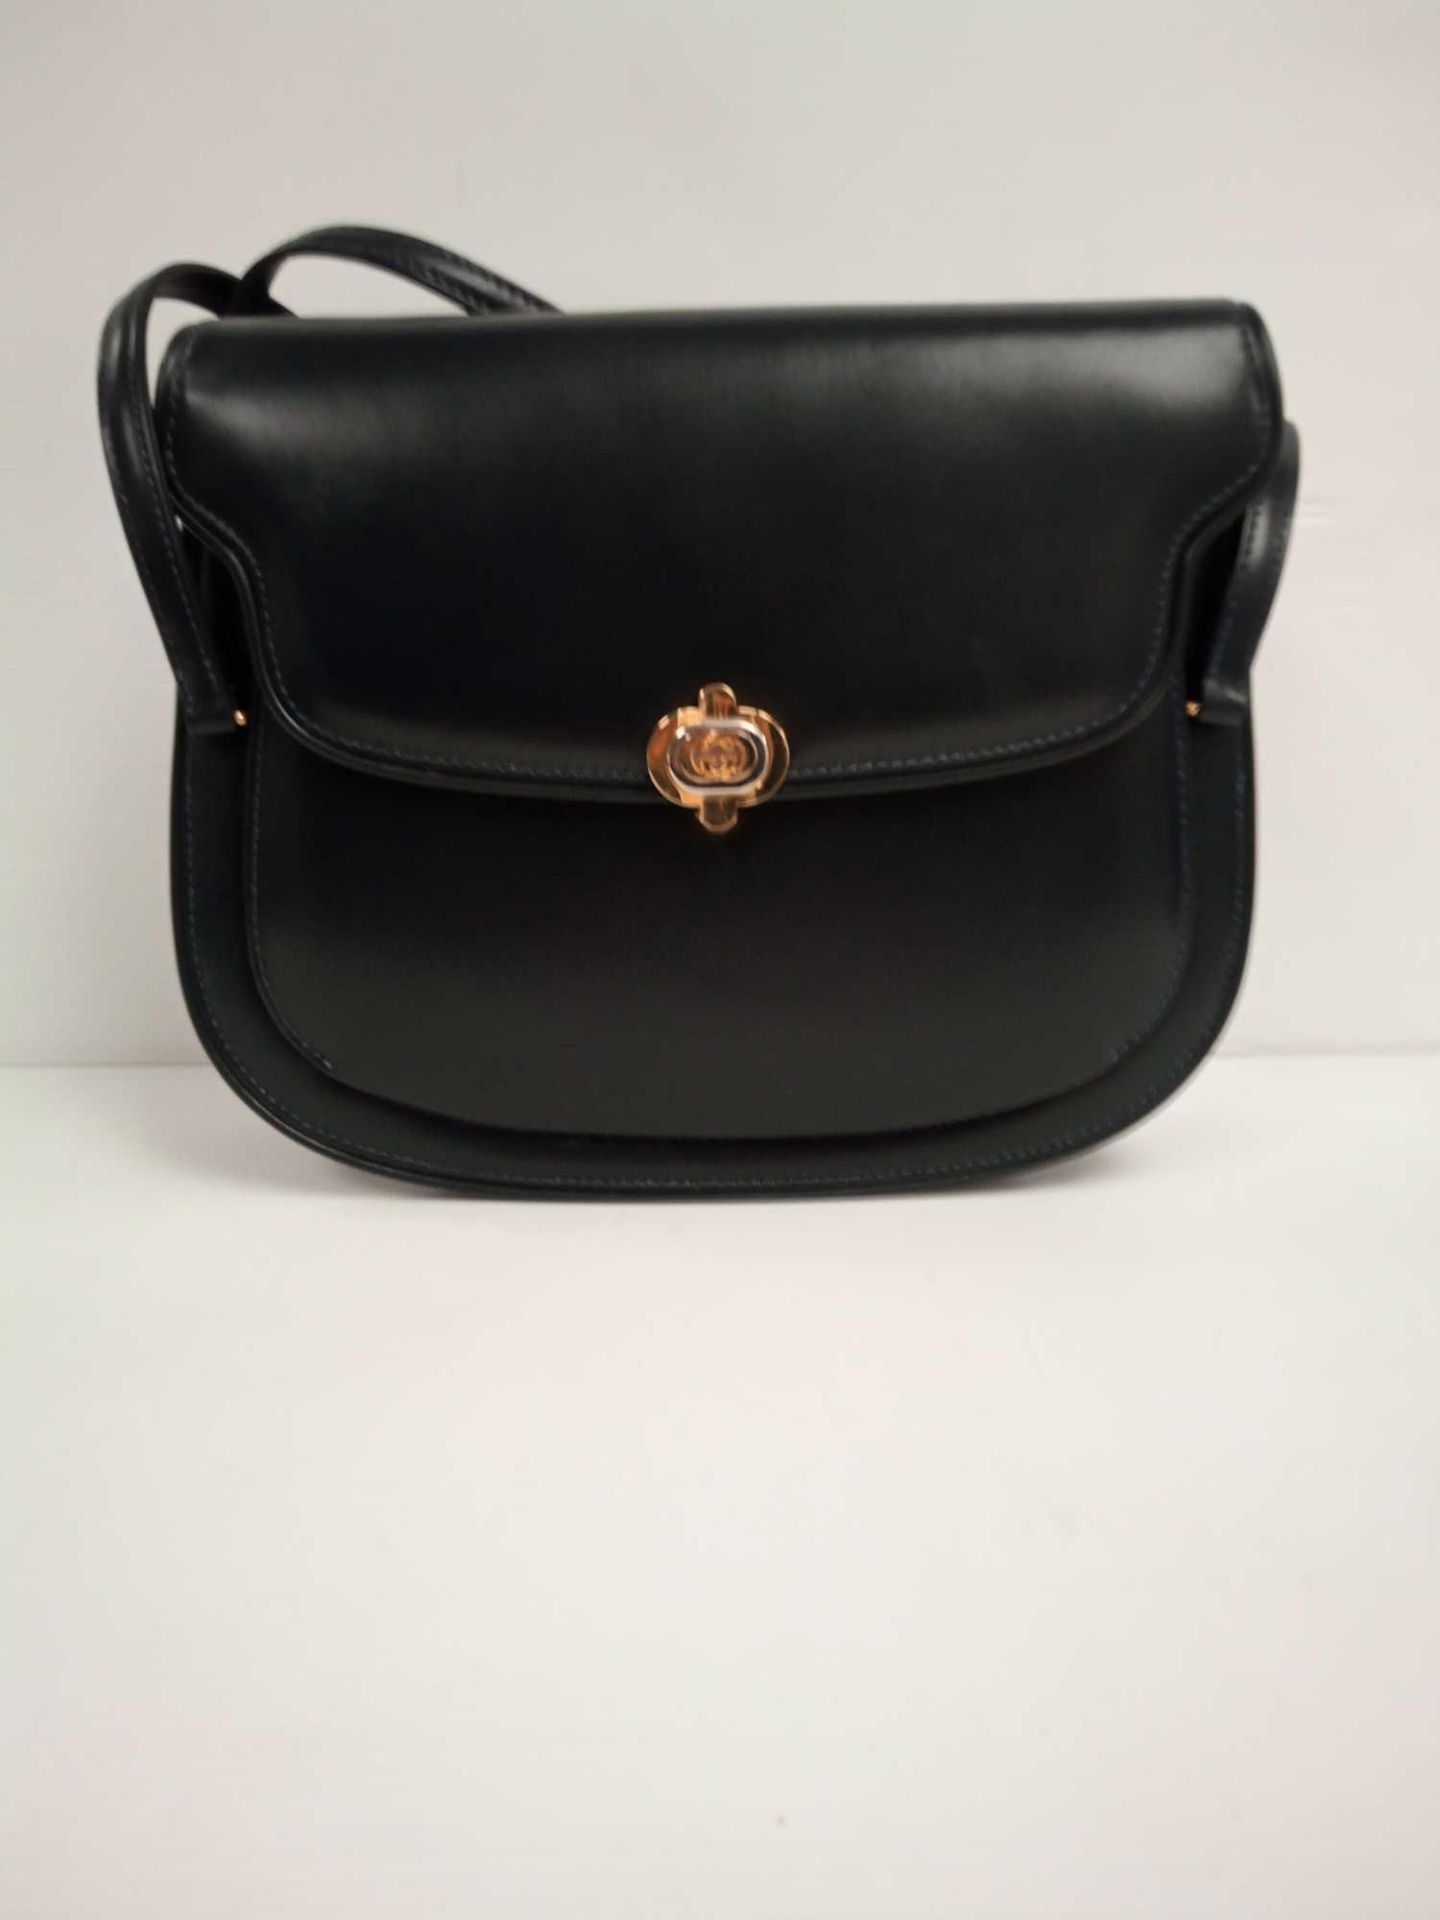 RRP £1350 Gucci Vintage Double Handle Flap Bag Black Calf Leather (Aao6641) Grade A (Appraisals - Image 2 of 2